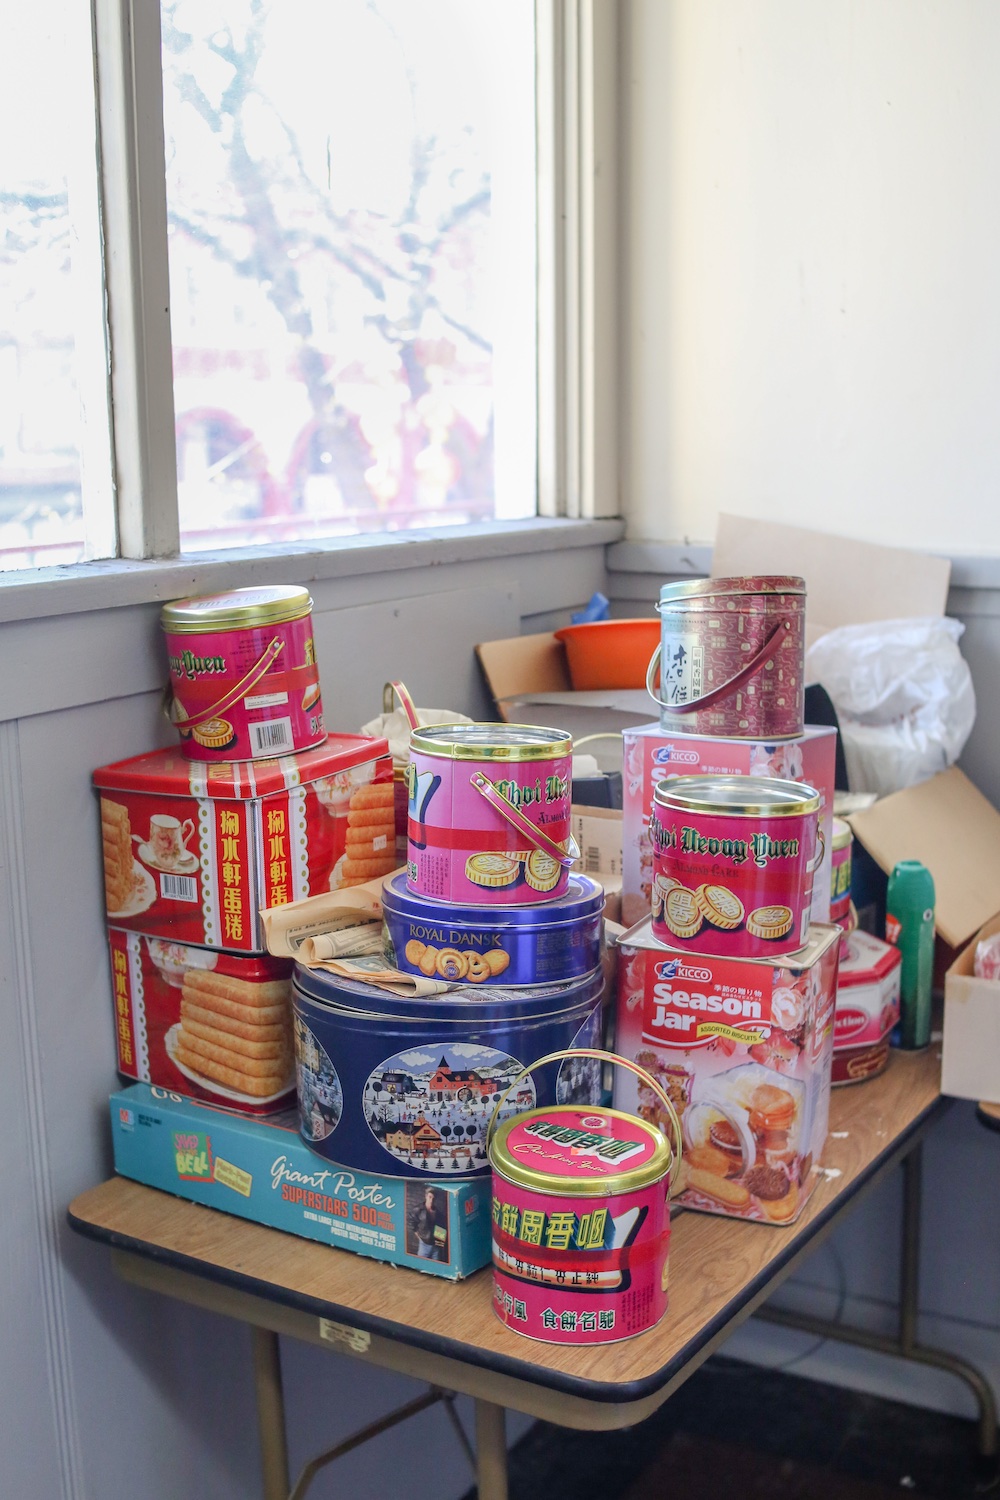 A stack of red, blue and pink cookie tins sits on an old wooden table loaded with discarded boxes and other packaging.